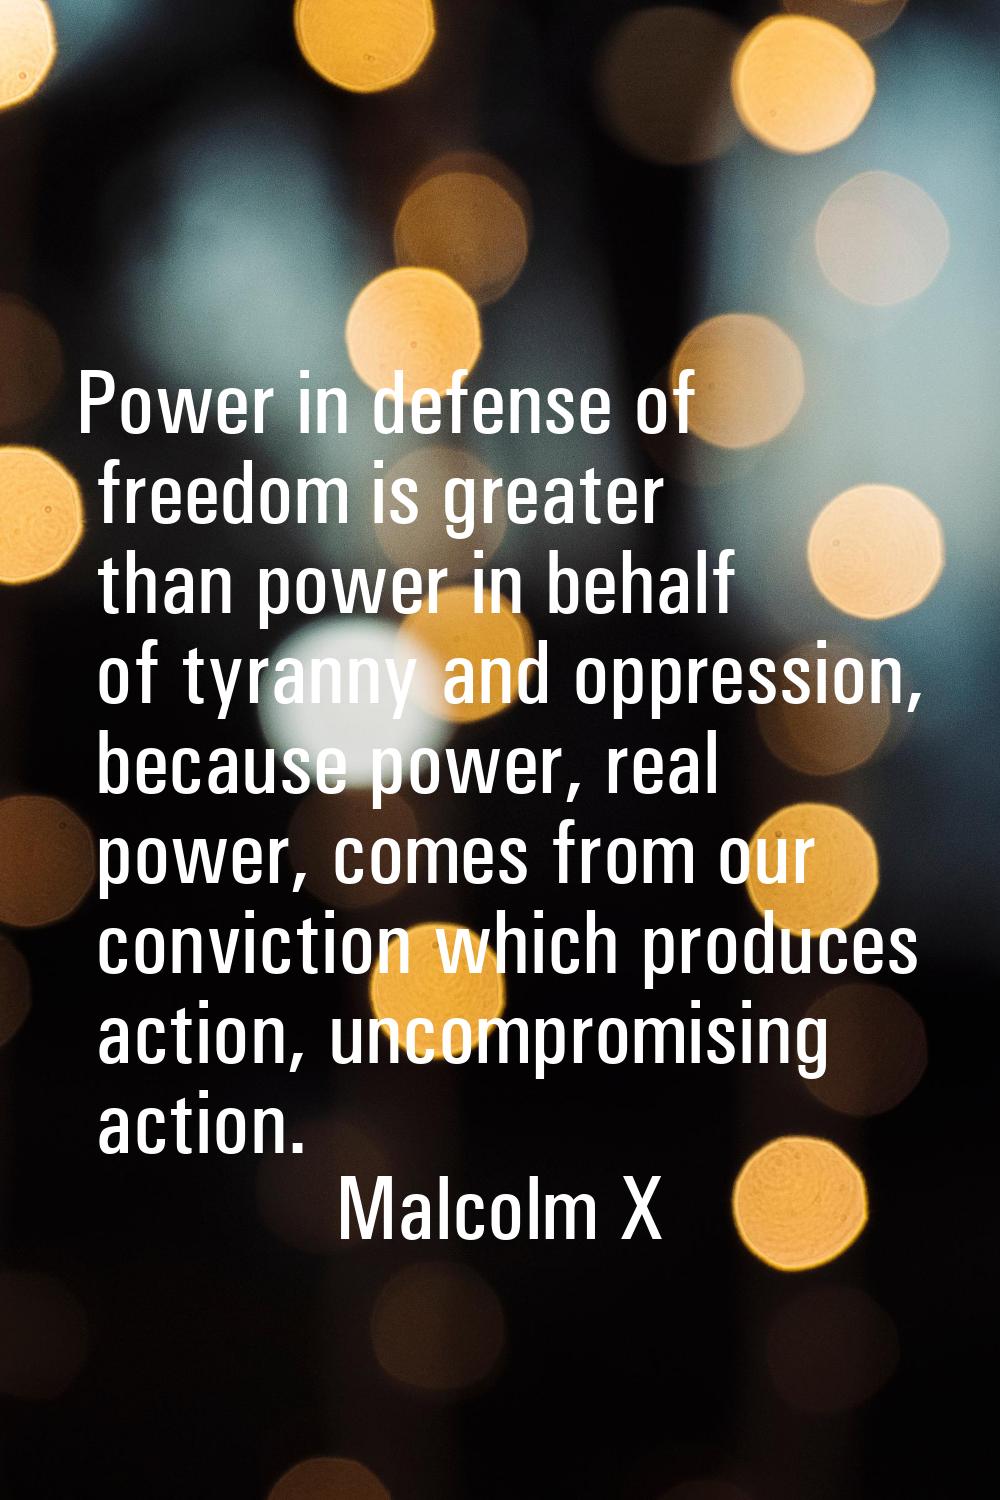 Power in defense of freedom is greater than power in behalf of tyranny and oppression, because powe